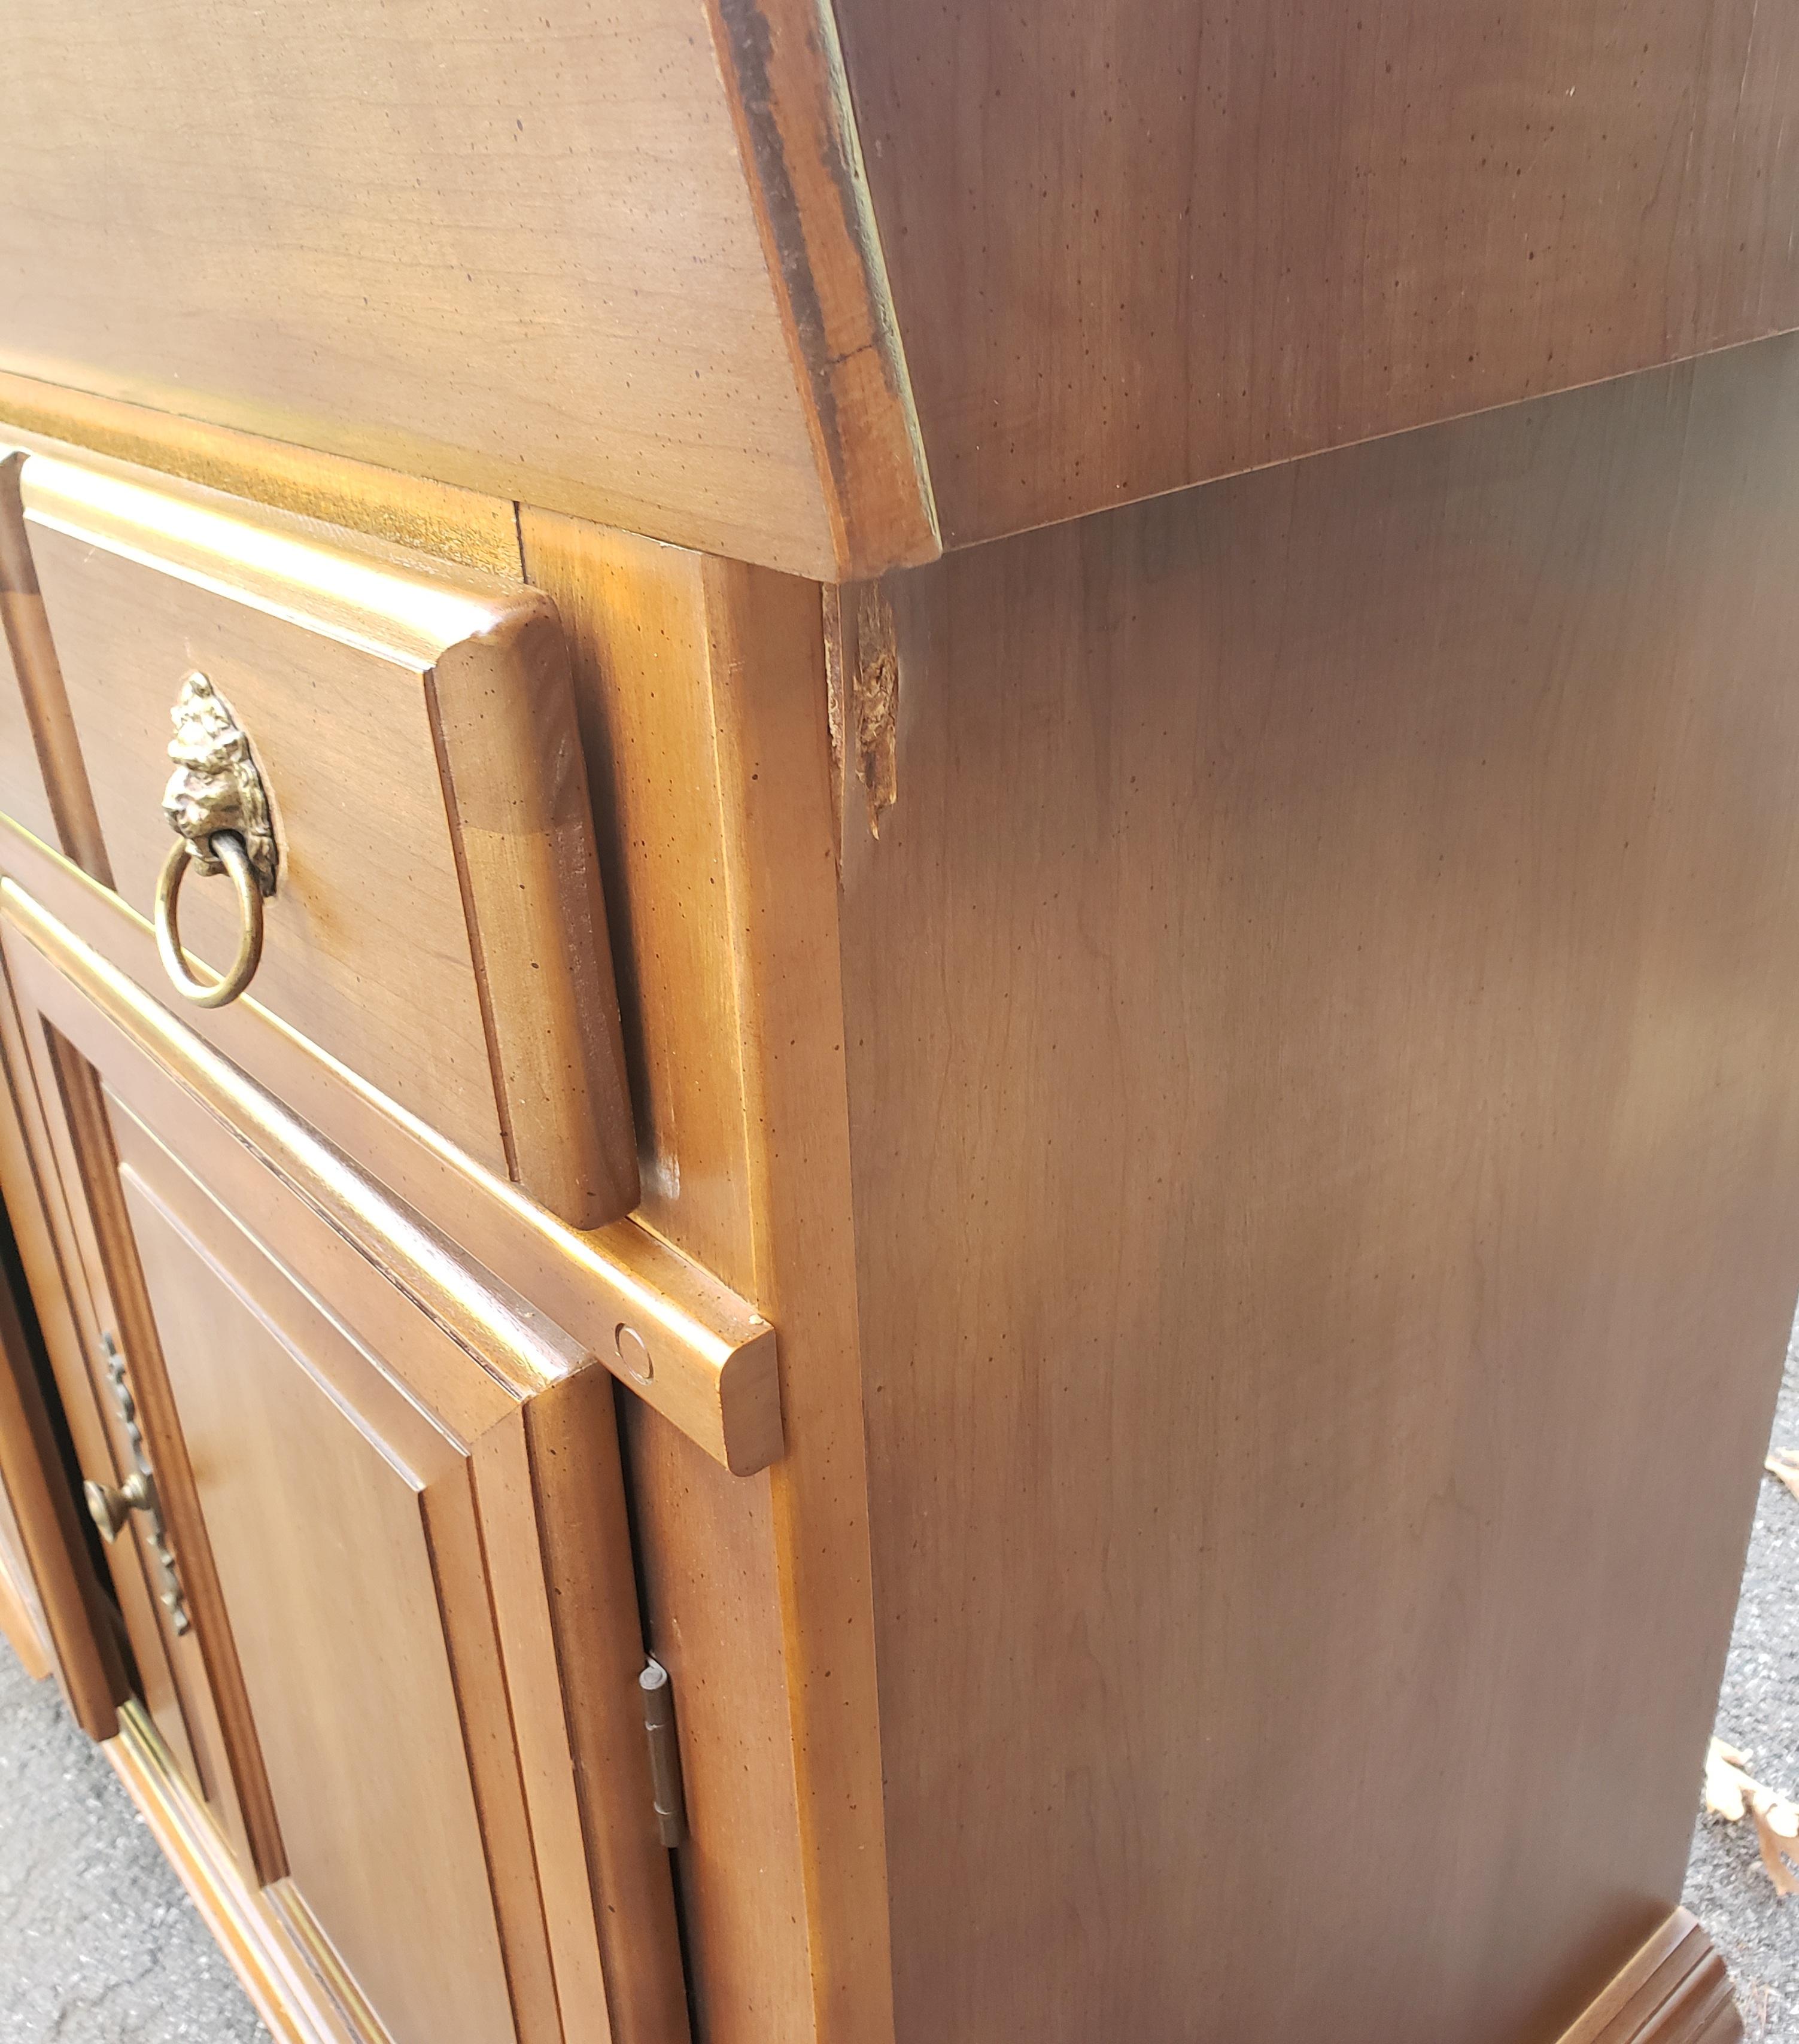 Vintage Bassett Maple Dry Sink Cabinet with Copper Lined Basin In Good Condition For Sale In Germantown, MD